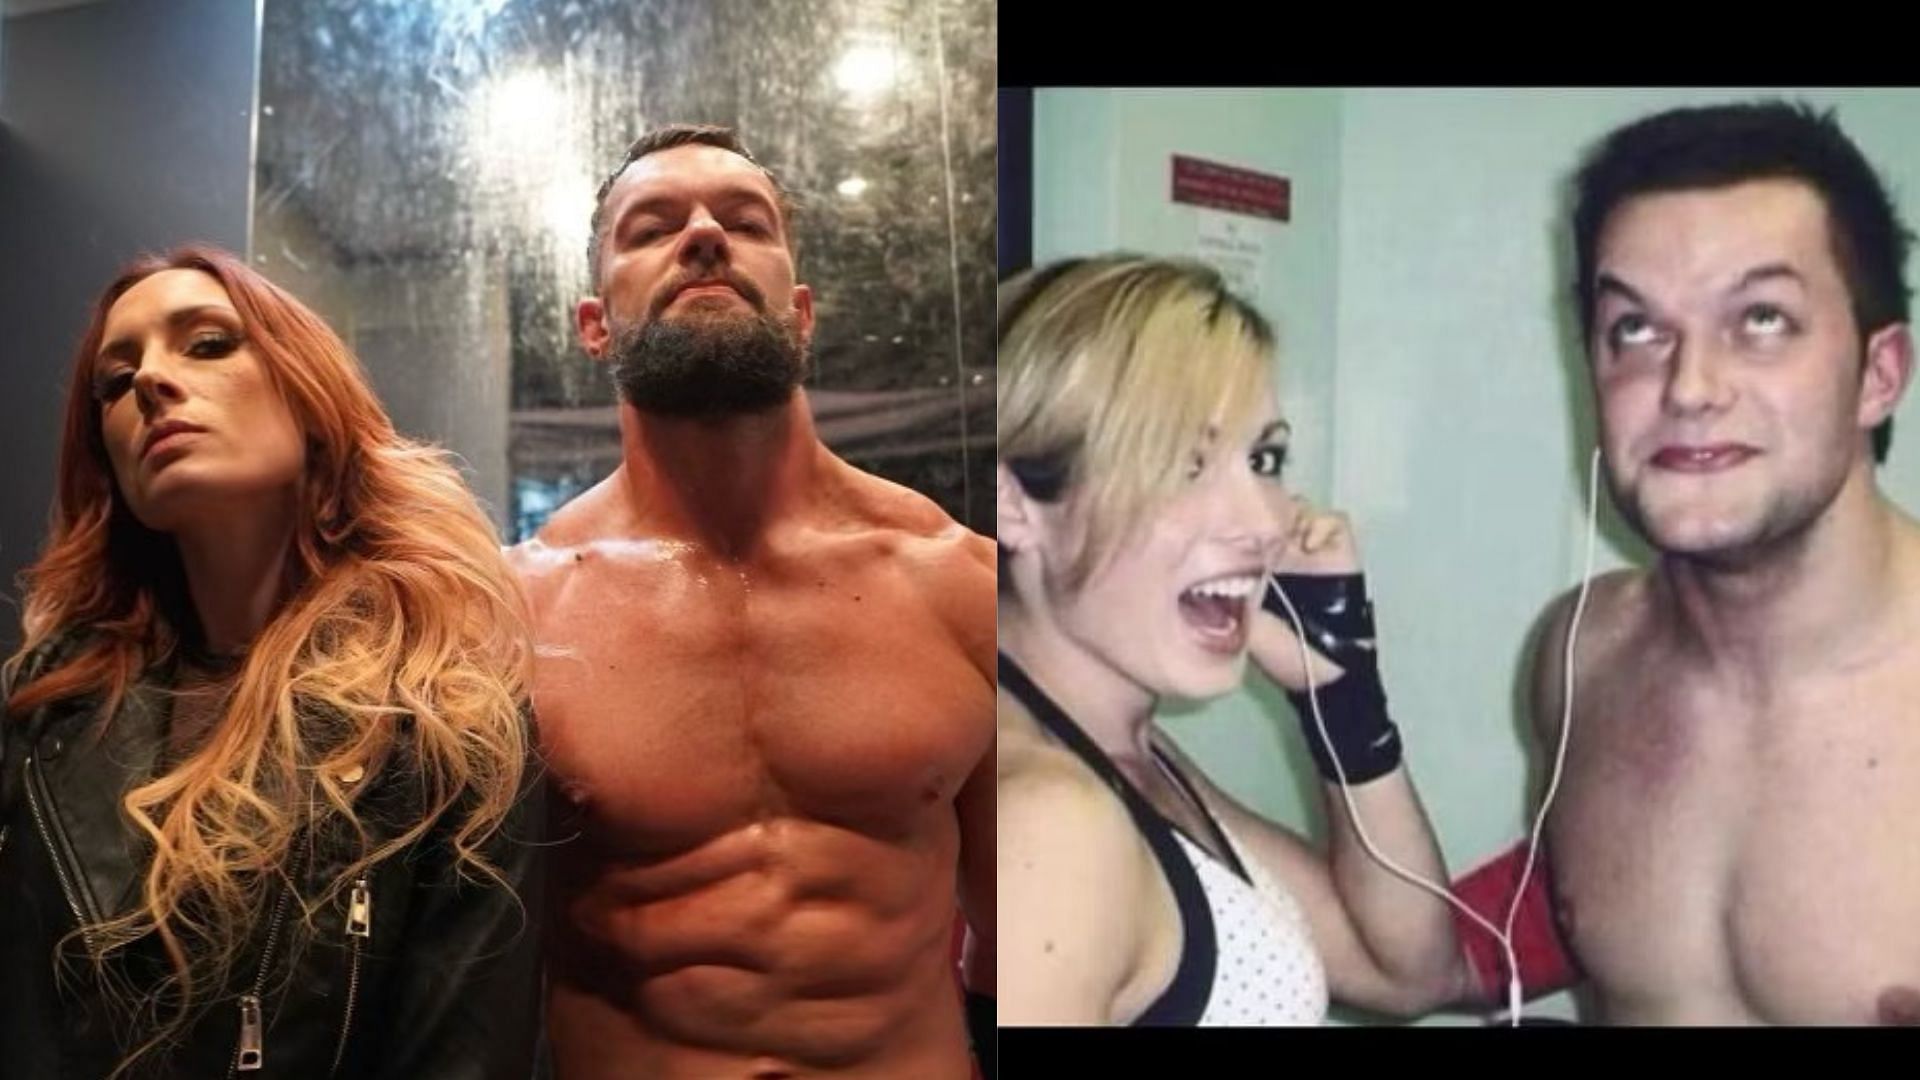 Finn Balor and Becky Lynch have known each other for a while